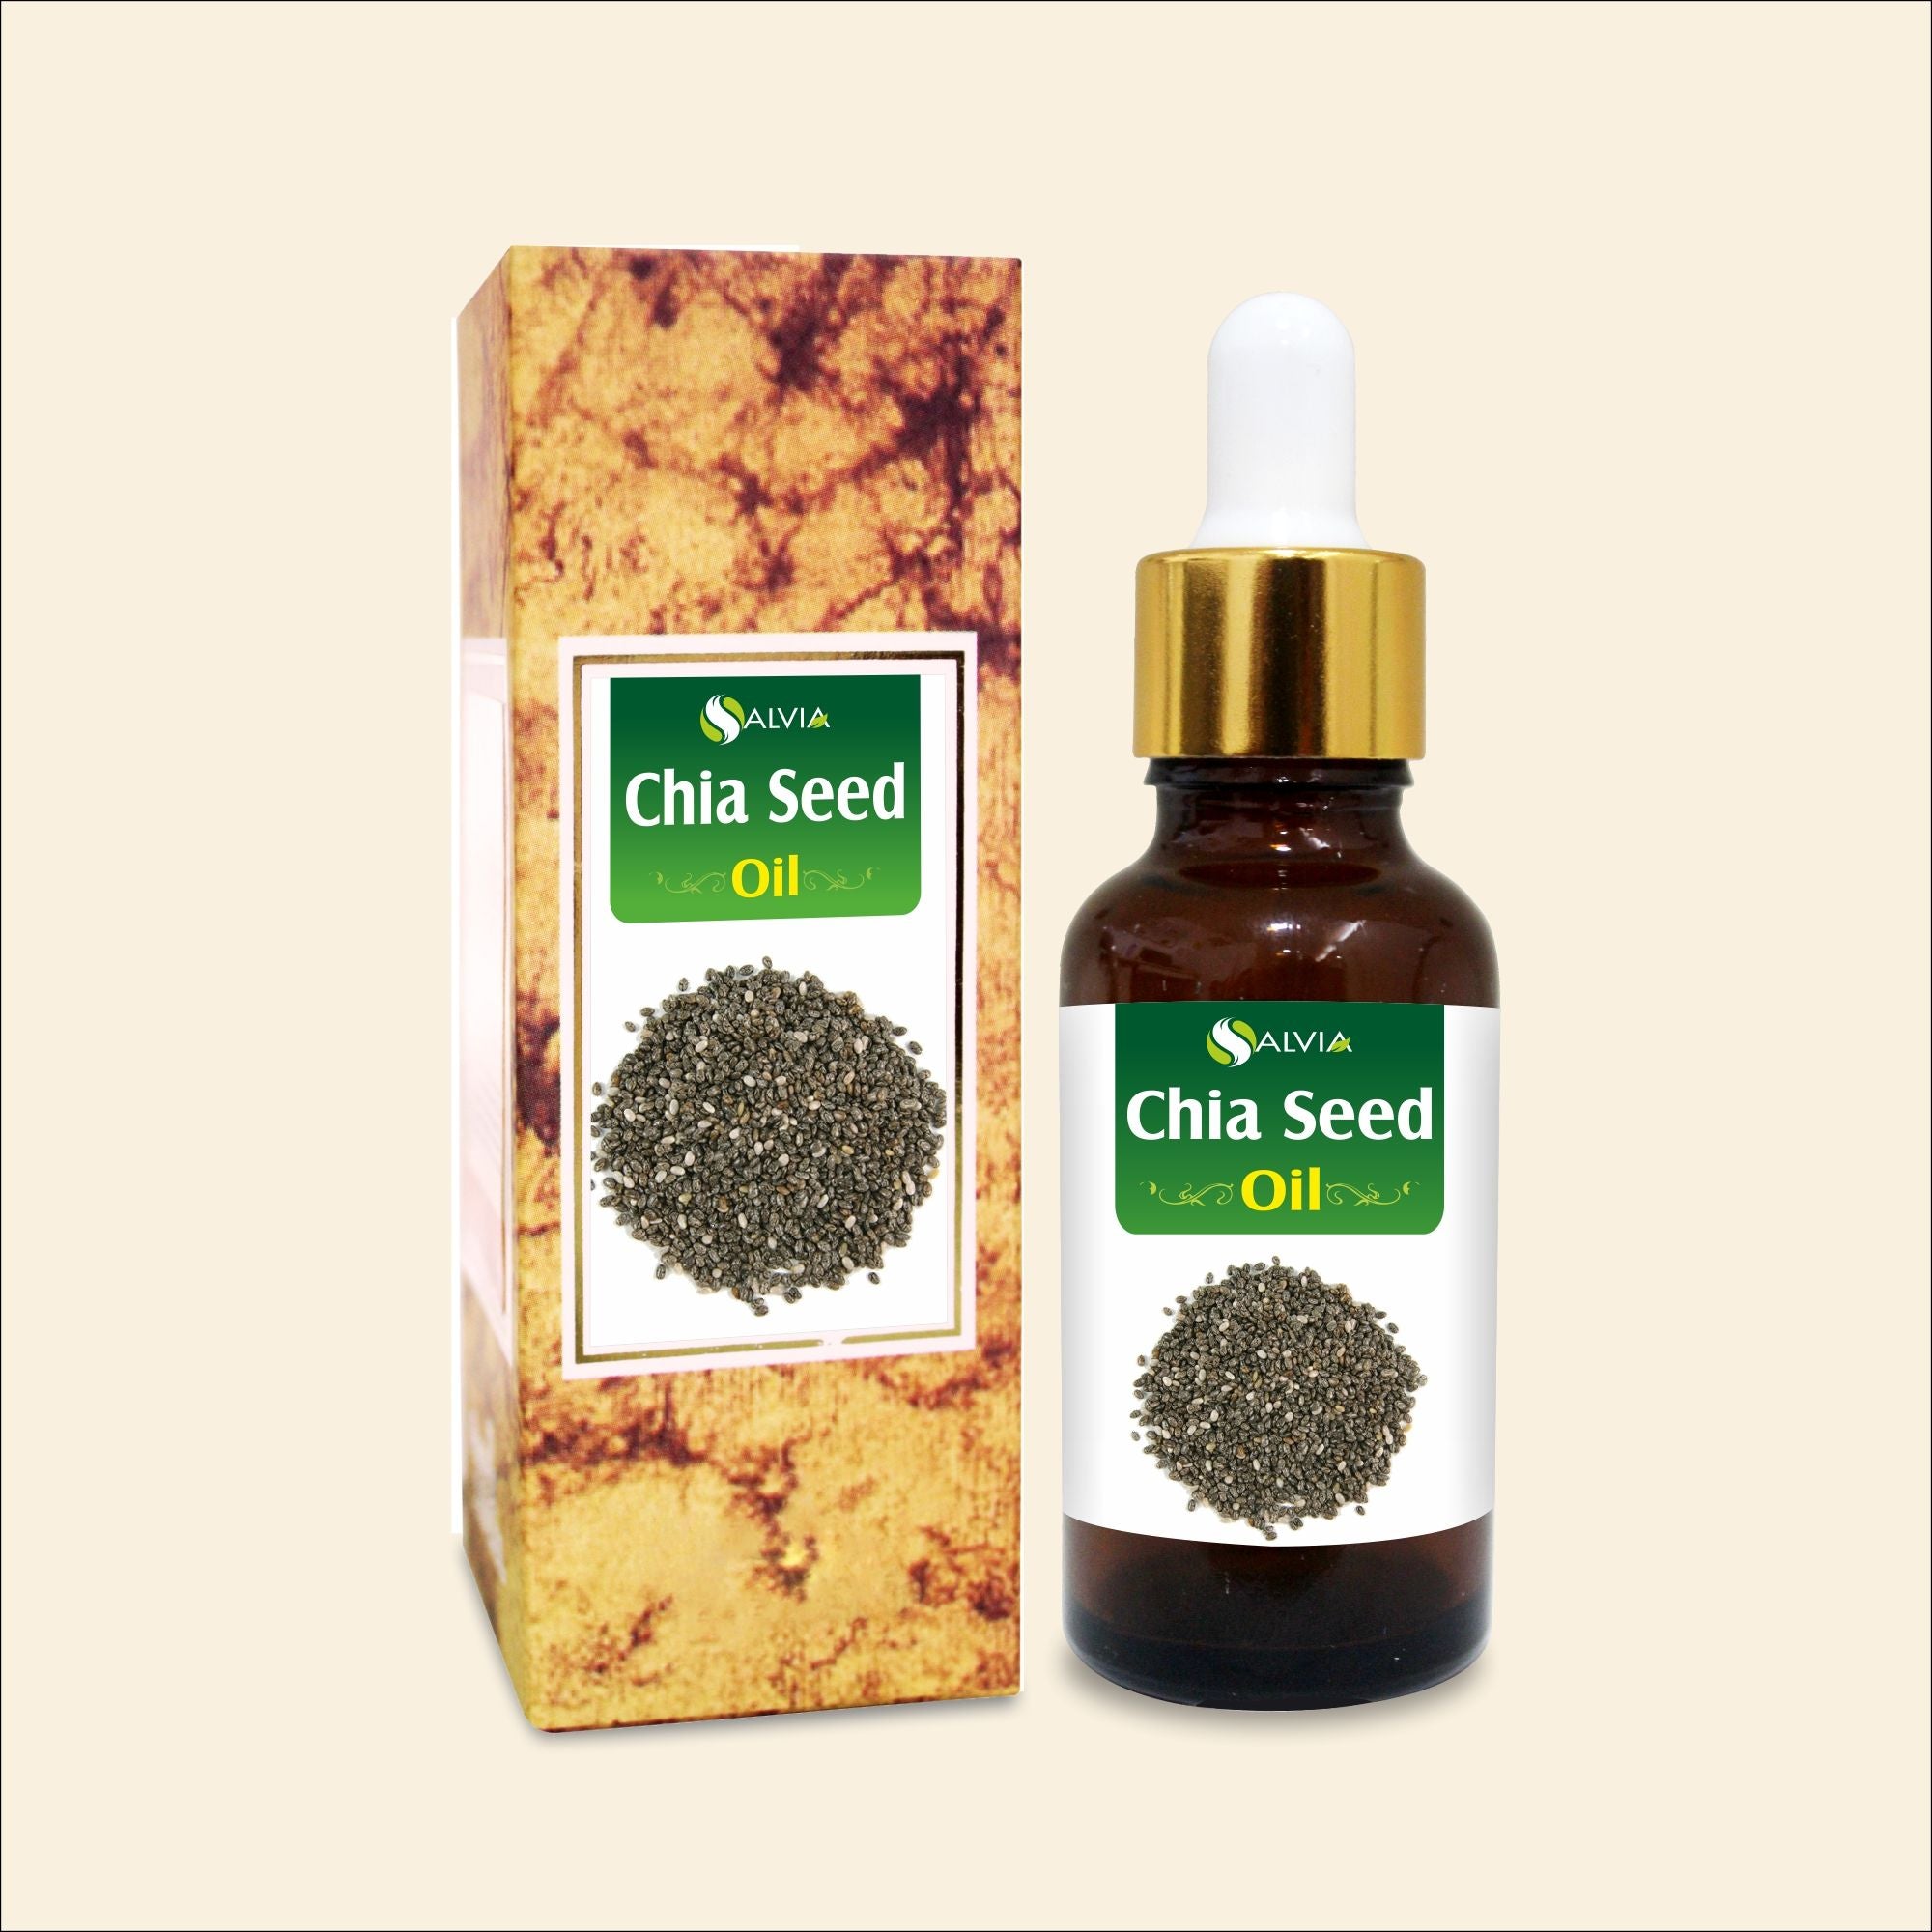 Salvia Natural Carrier Oils Chia Seed Oil